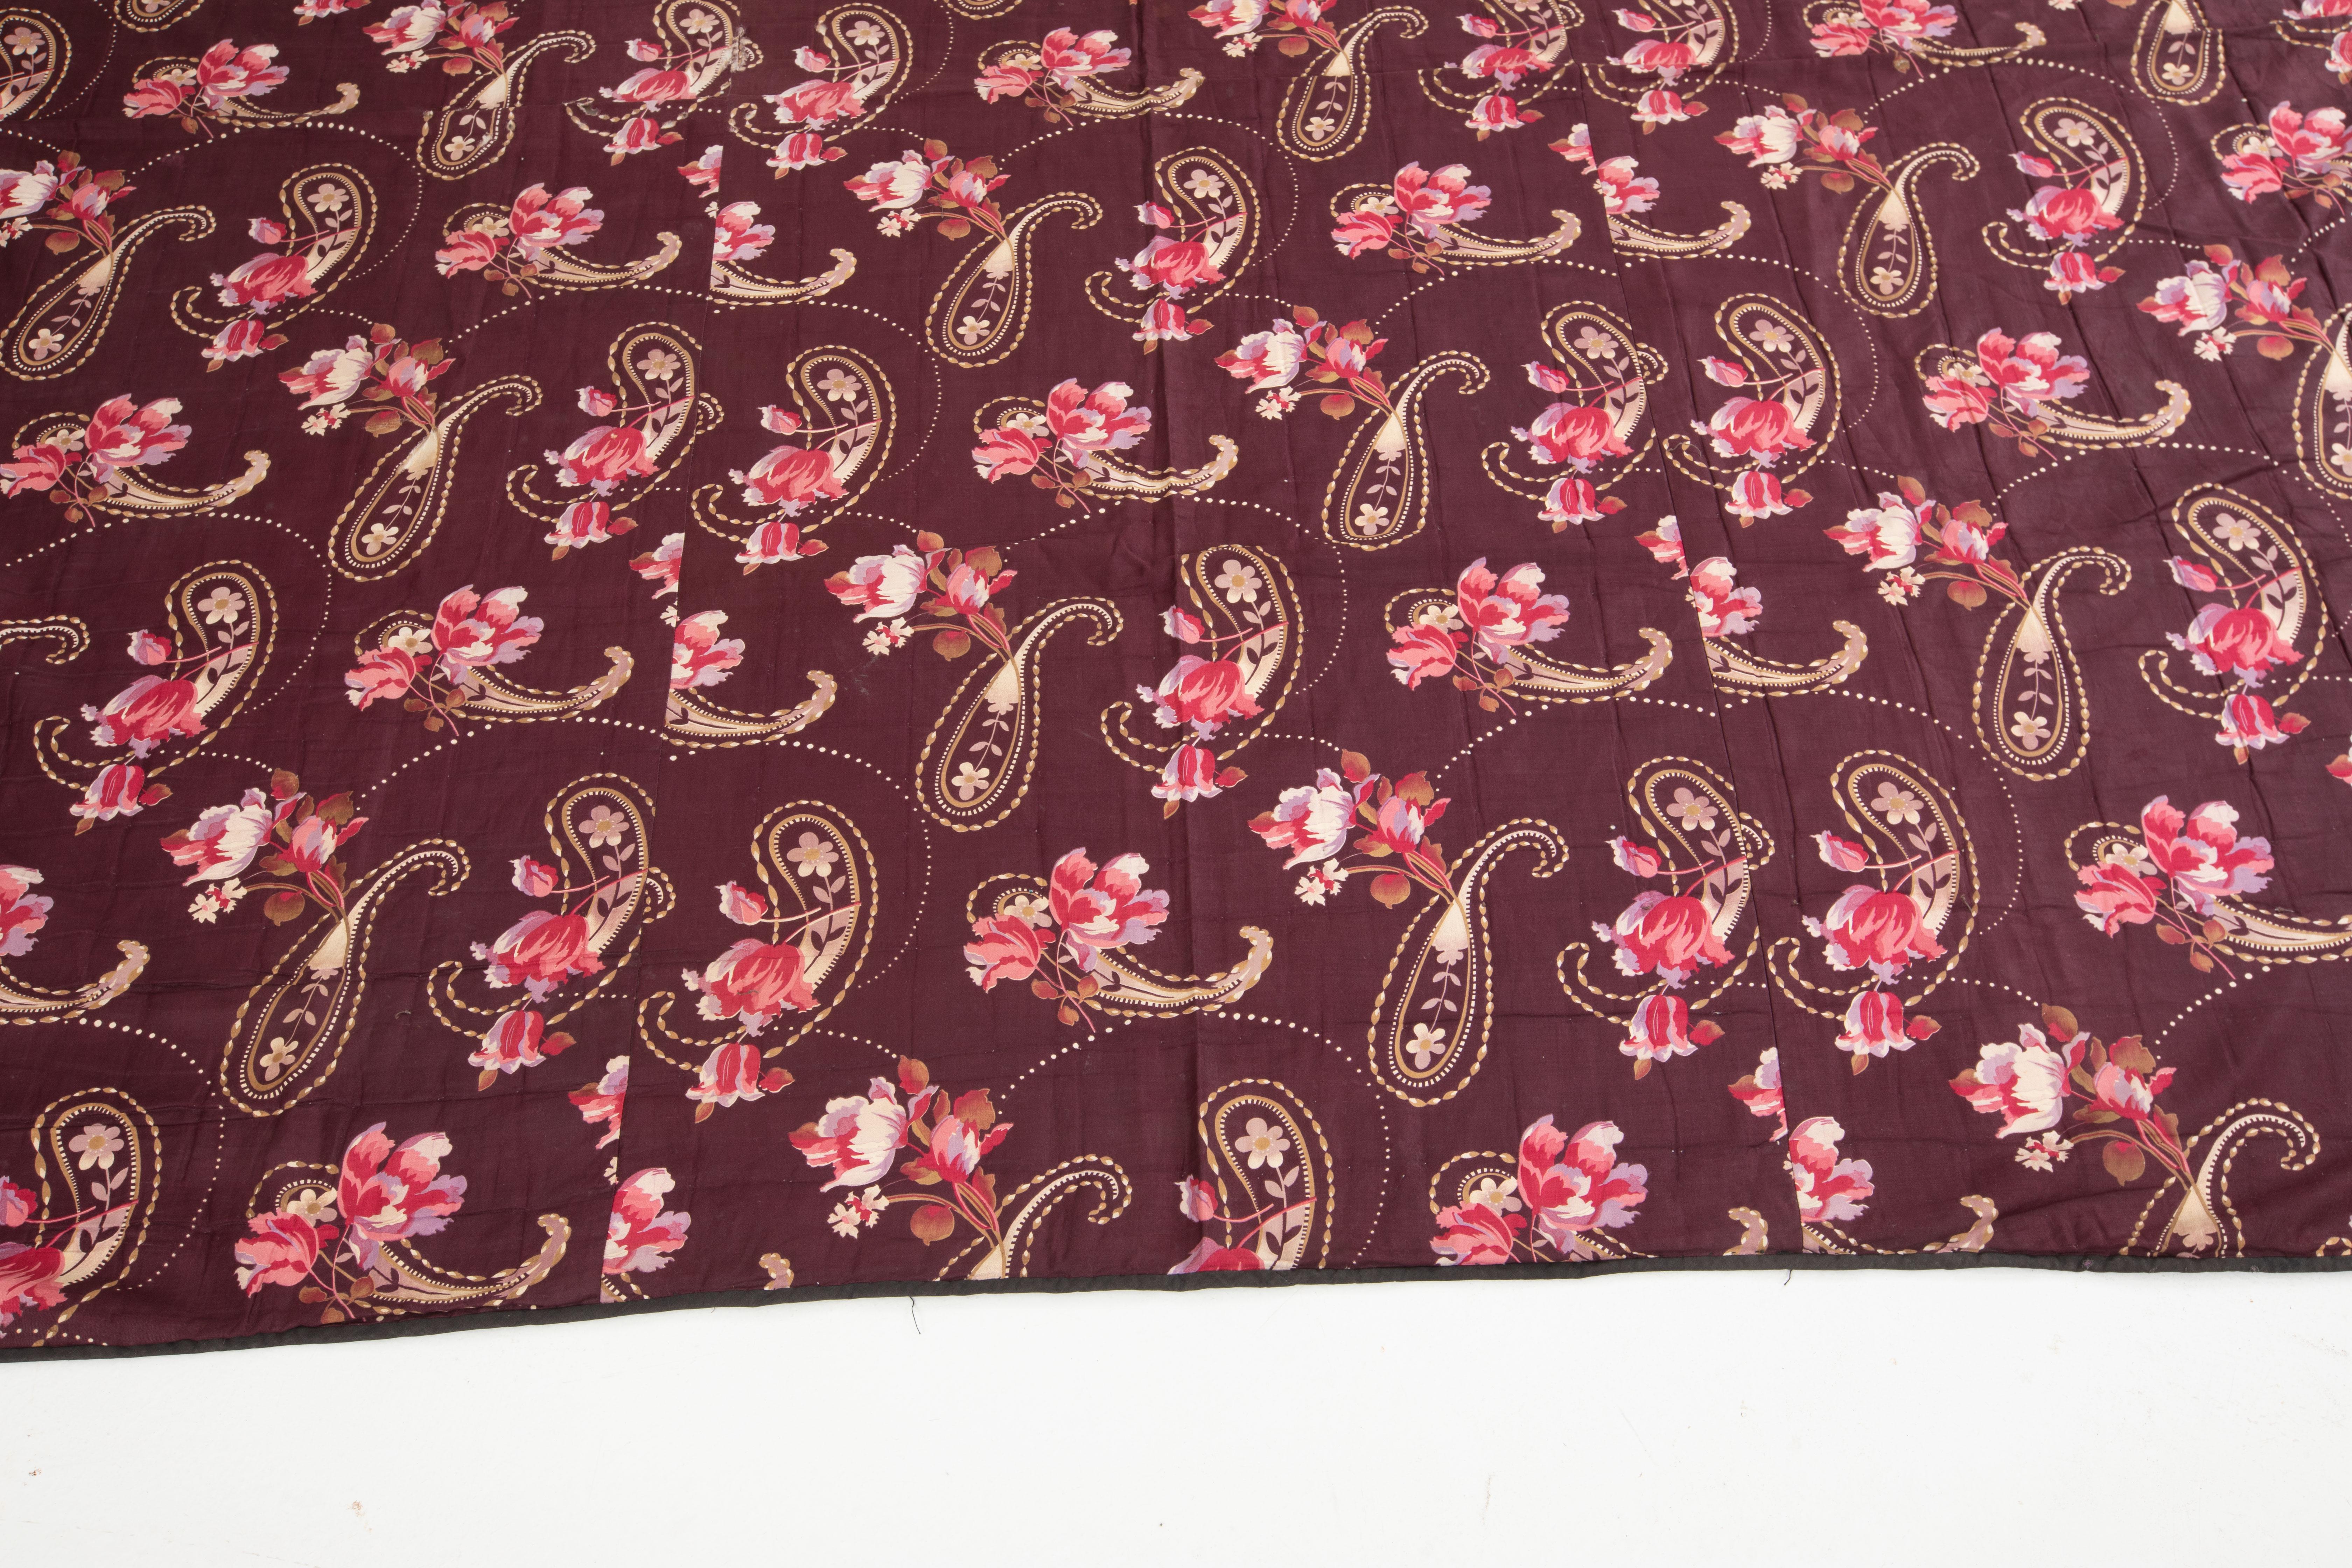 Woven Russian Roller Printed Cotton Fabric Panel, Mid-20th Century or Earlier For Sale